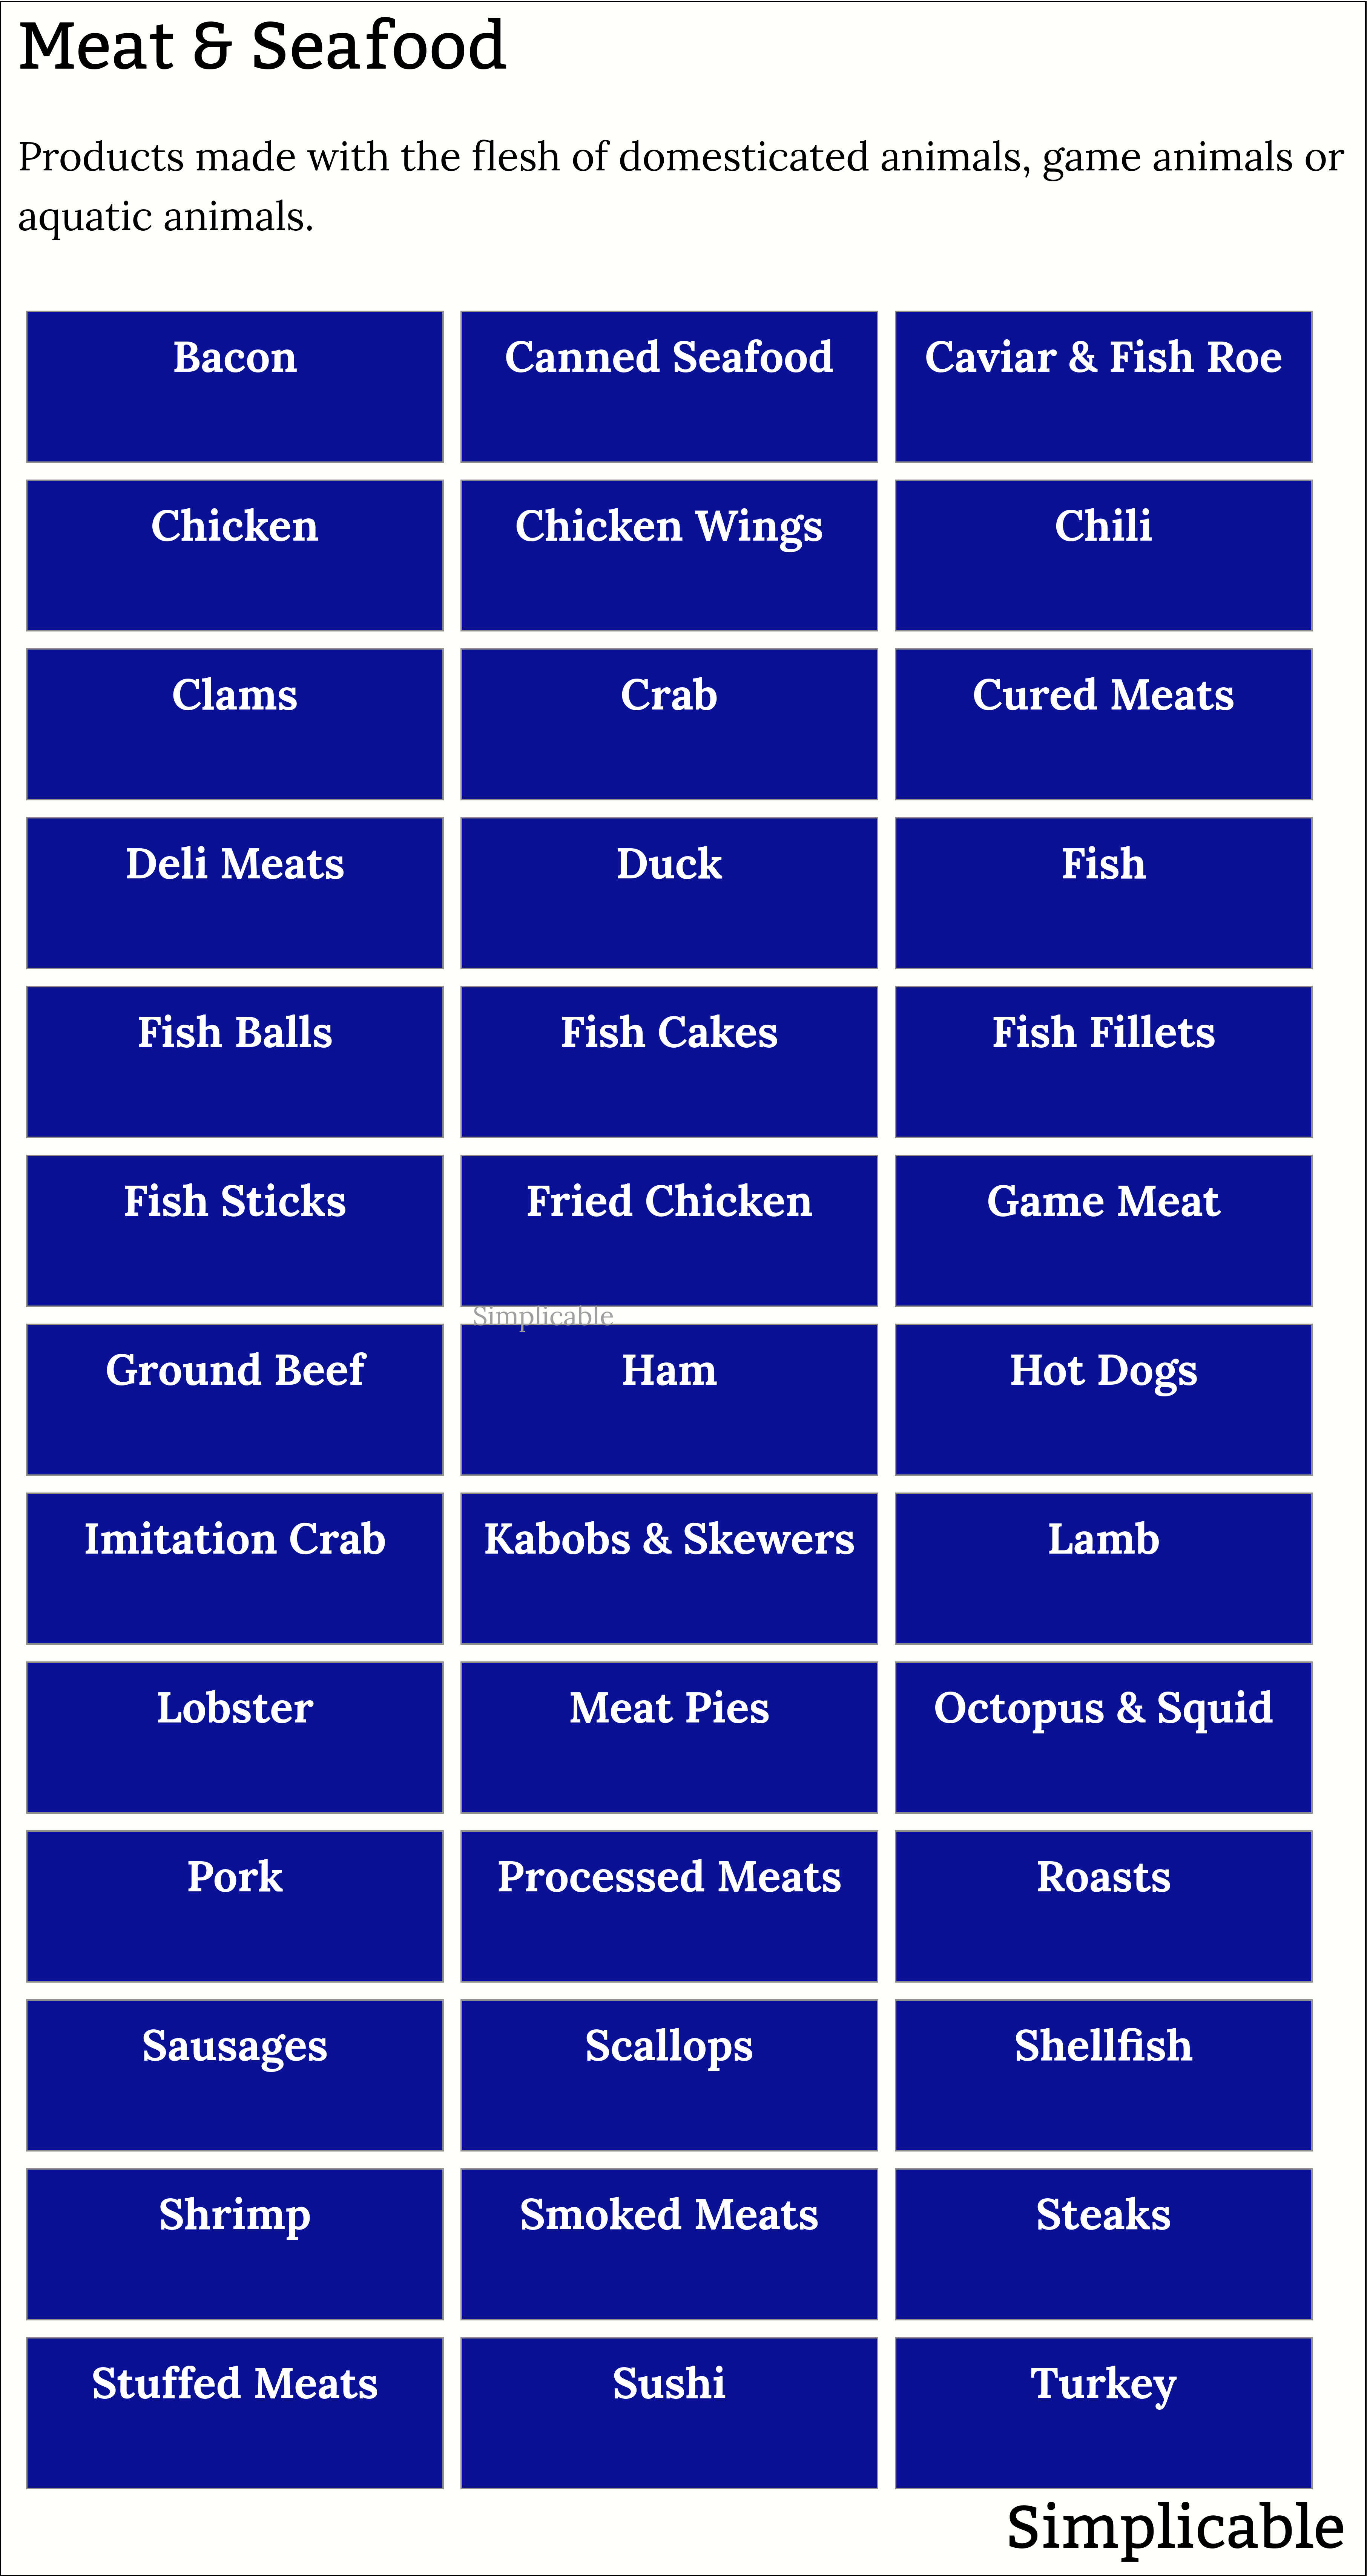 examples of meat and seafood products